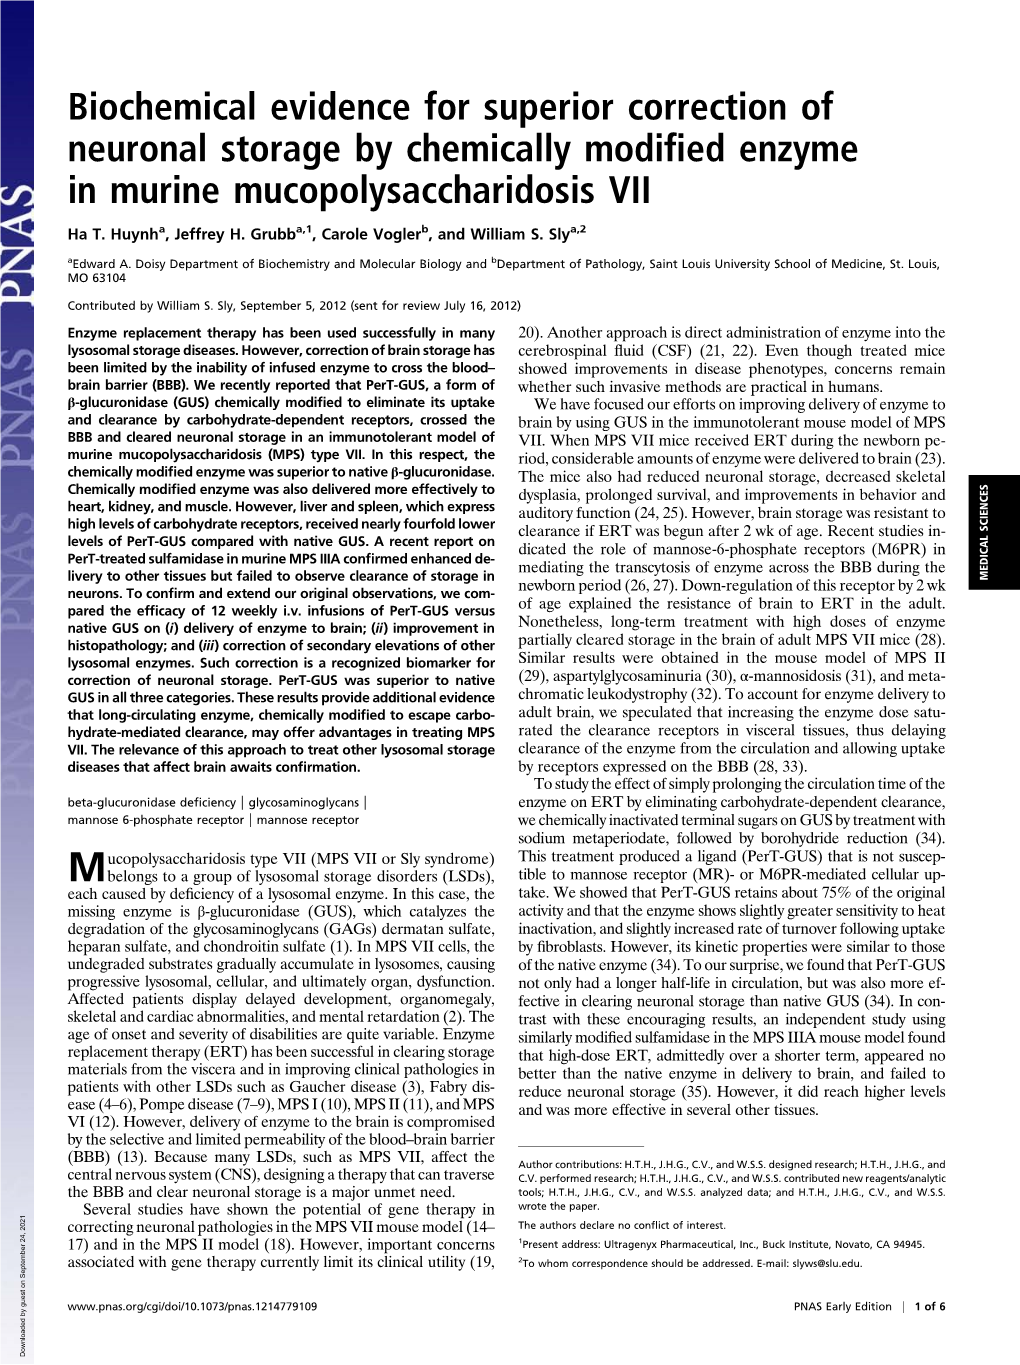 Biochemical Evidence for Superior Correction of Neuronal Storage by Chemically Modiﬁed Enzyme in Murine Mucopolysaccharidosis VII